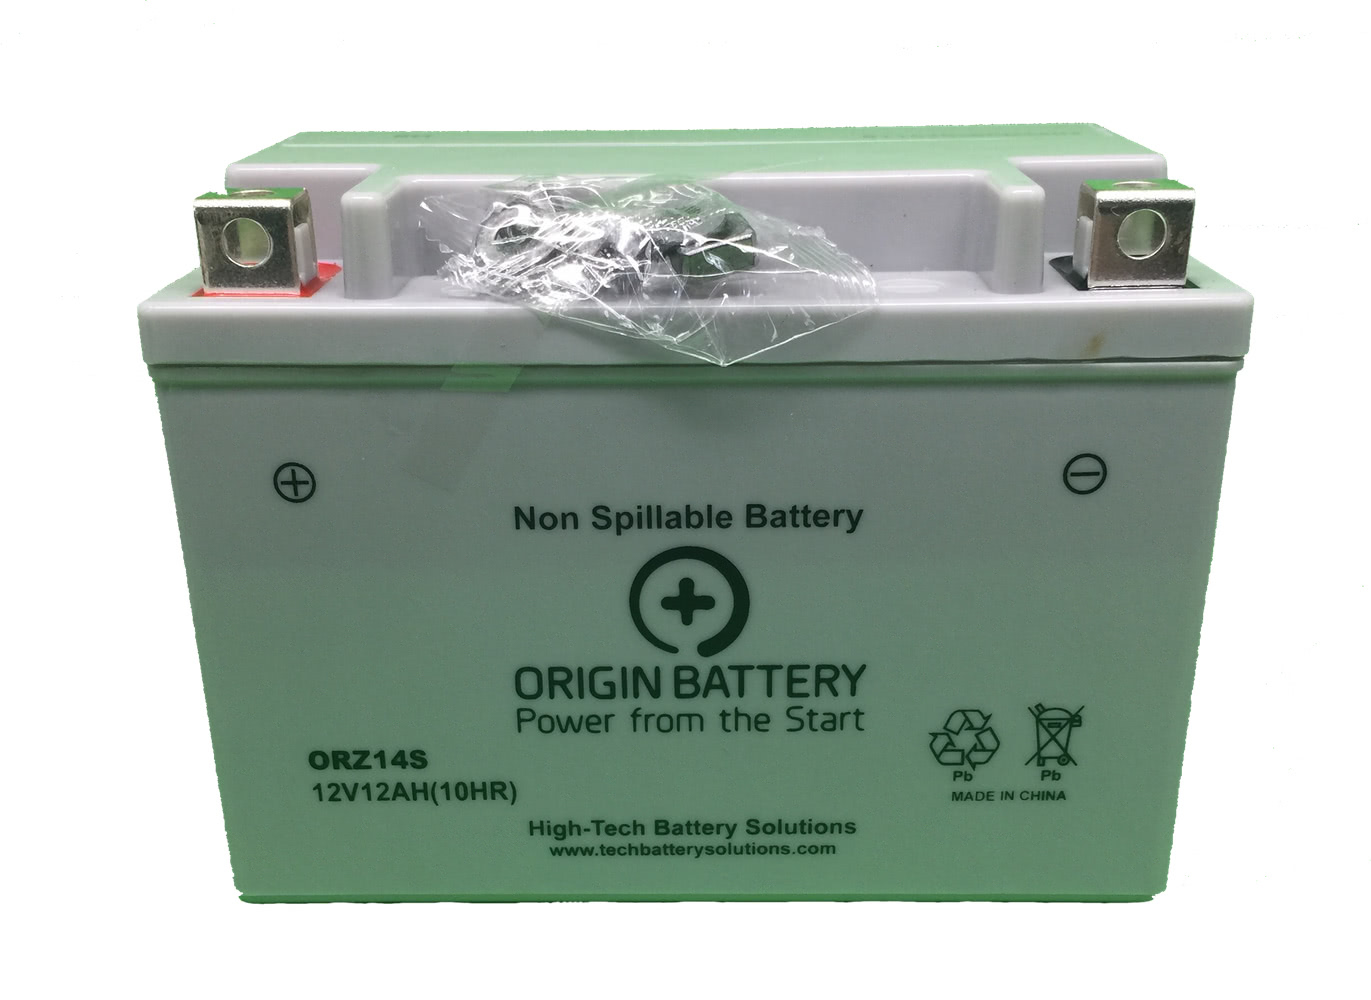 BMW F700GS (Auxiliary Battery) Battery Replacement (2011-2018) Questions & Answers